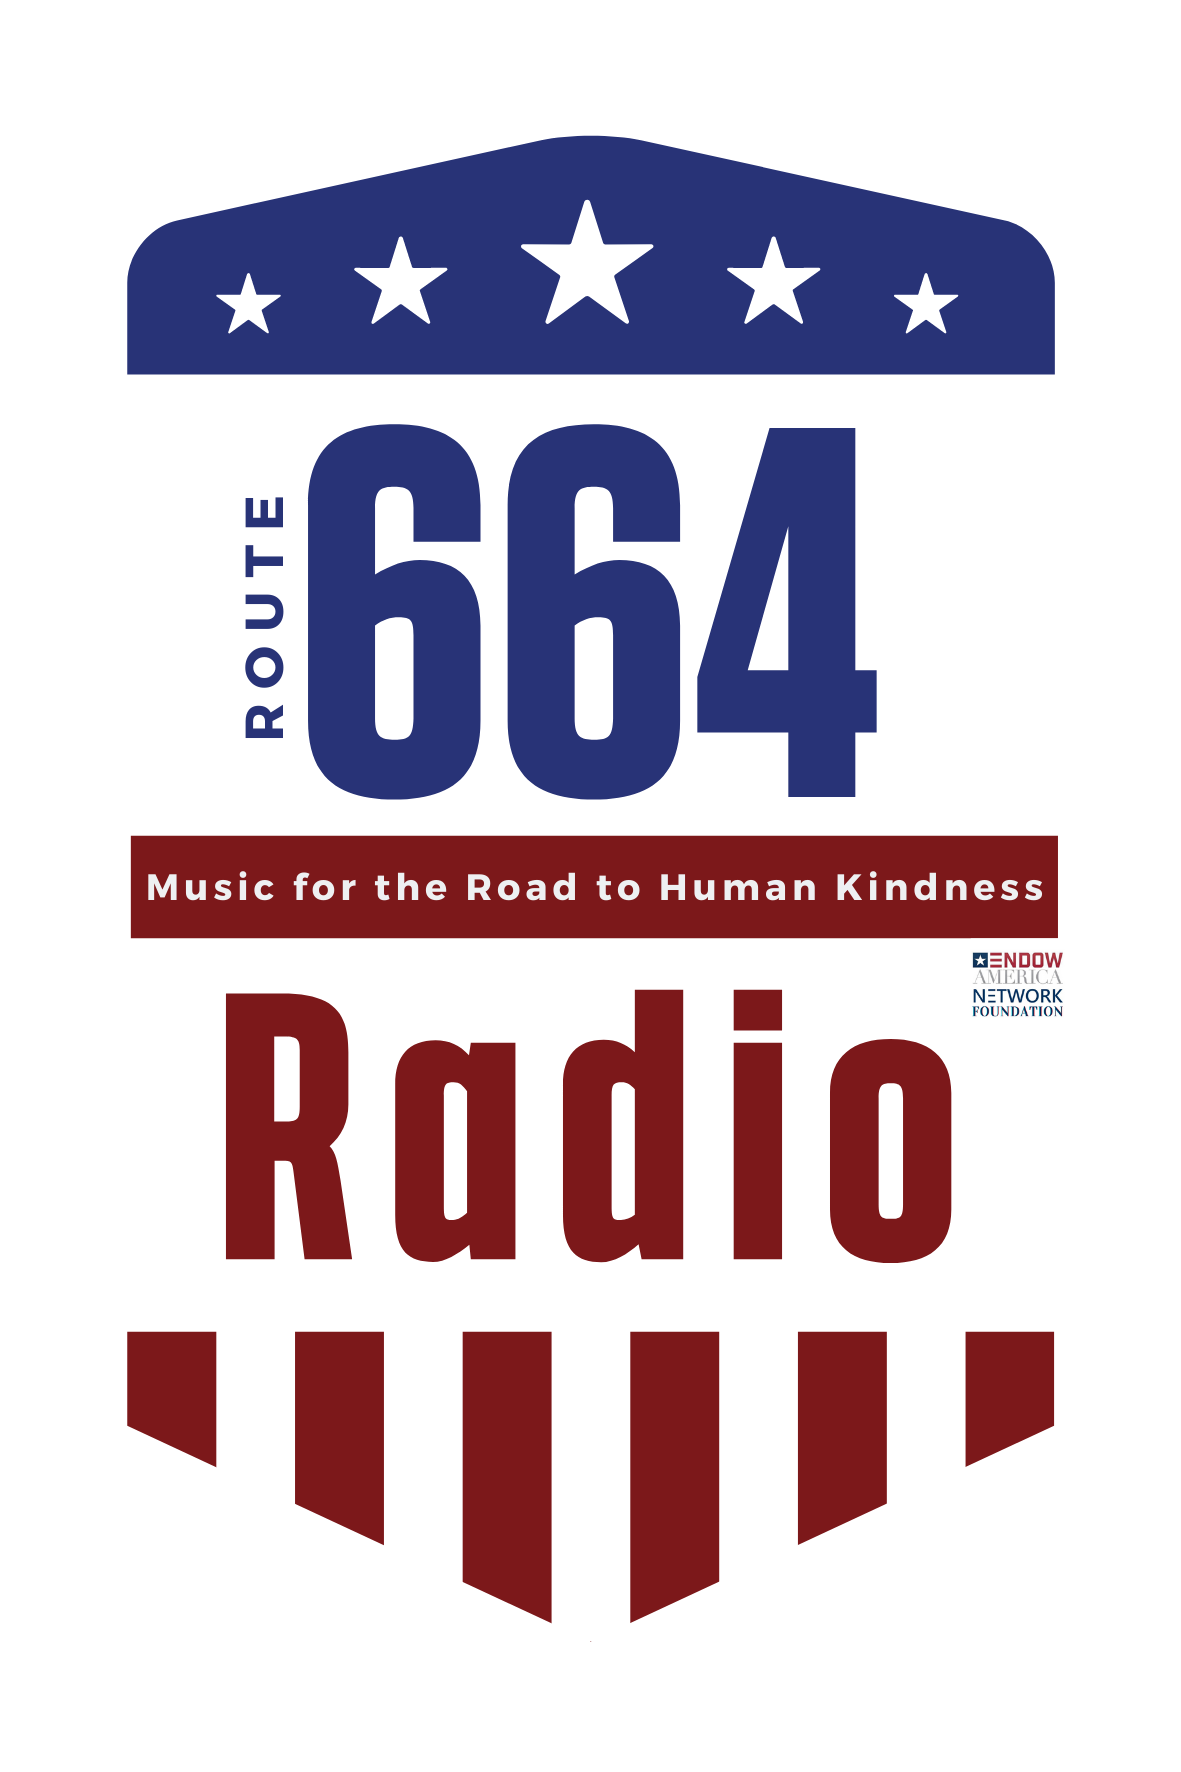 Art for 21 on the road to human kindess Route 664 radio by SocialSecharity.org